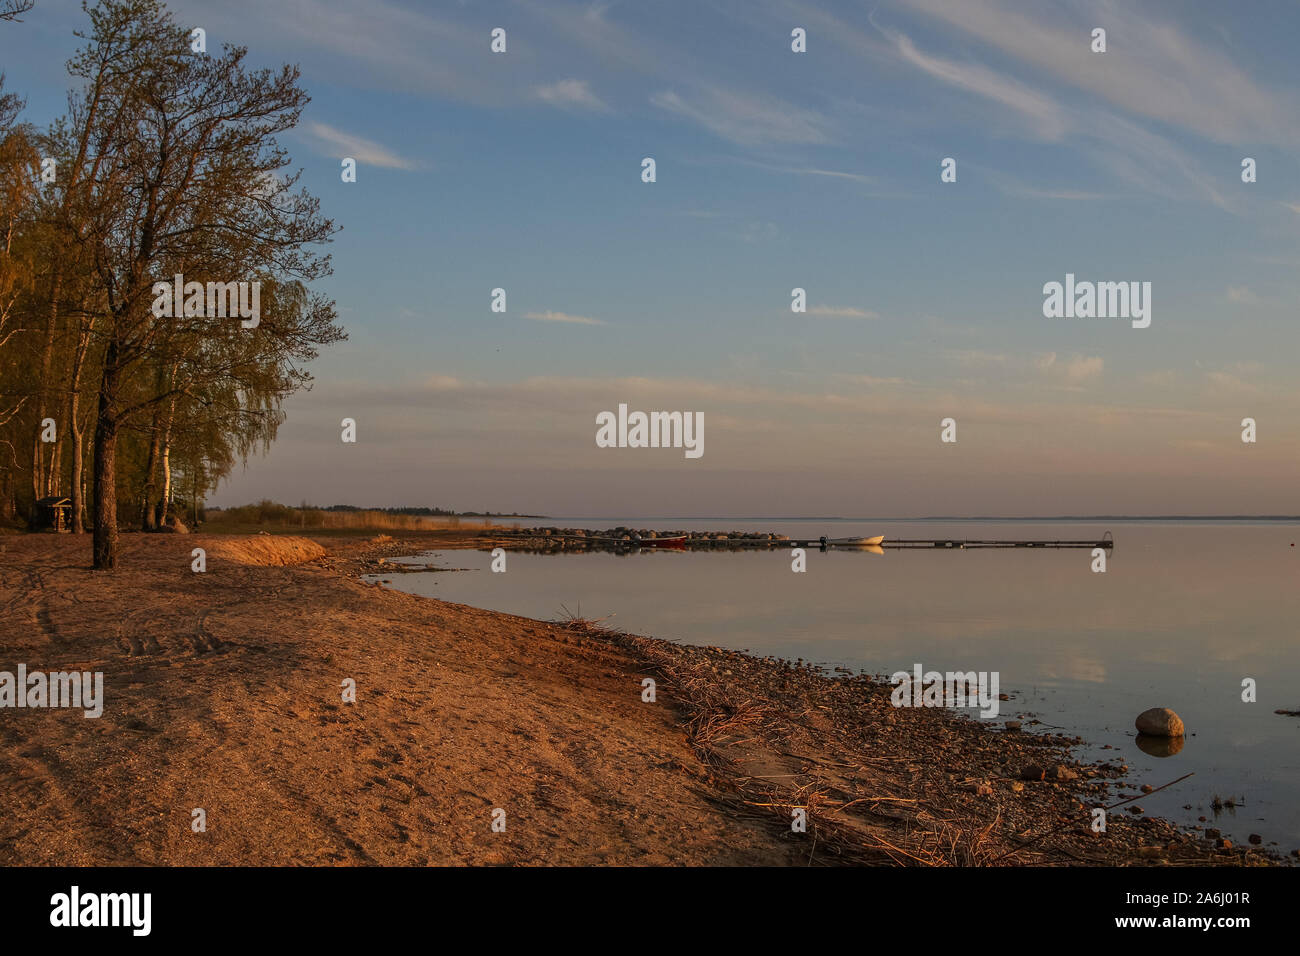 Sunset over the second largest lake in Estonia named Vortsjarv is seen near the village of  Vaibla, Estonia, on 30 April 2019  © Michal Fludra / Alamy Live News Stock Photo